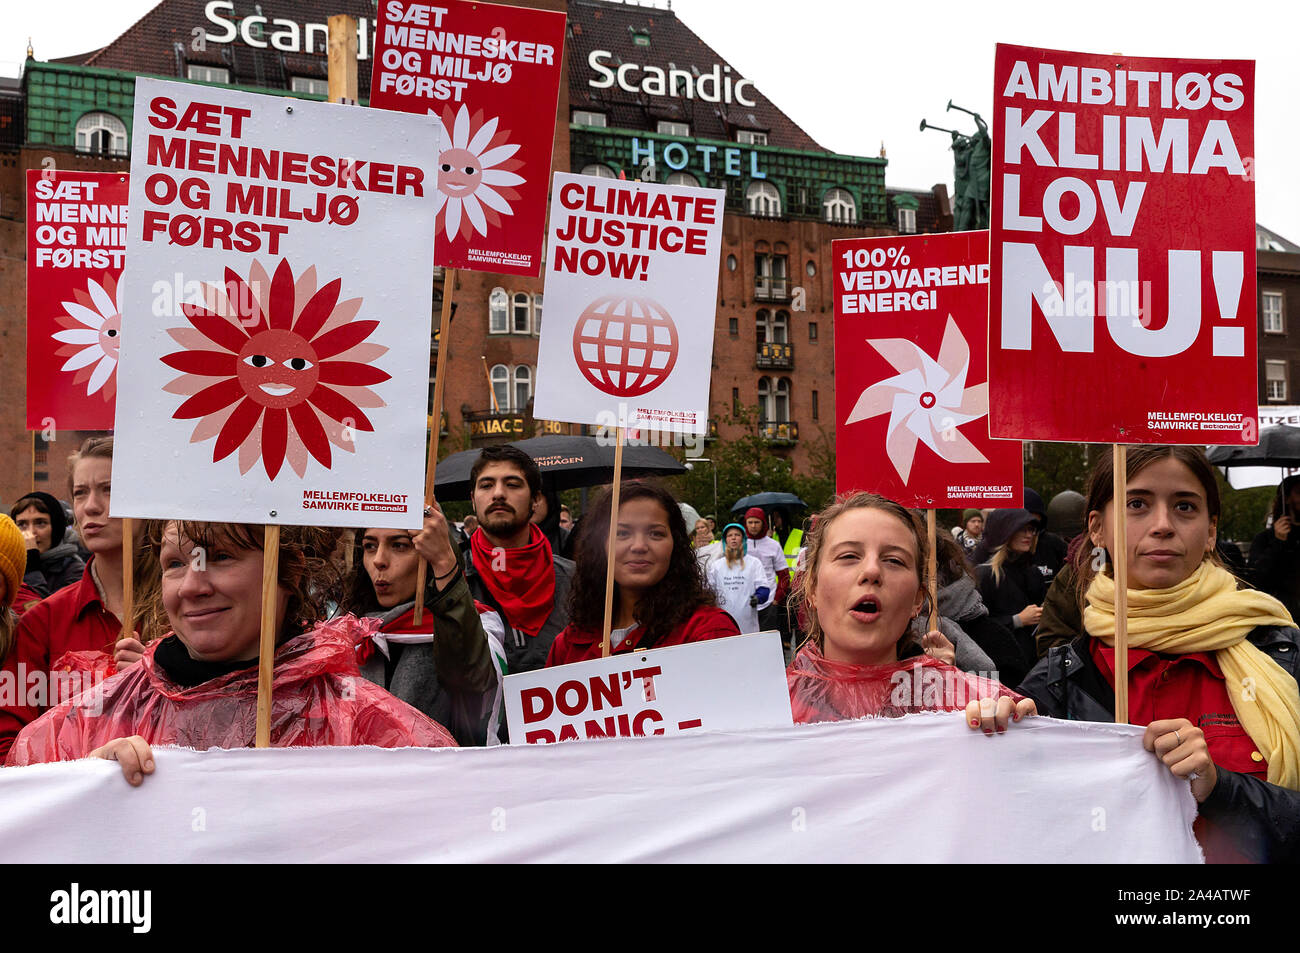 COPENHAGEN, DENMARK – OCTOBER 11, 2019:  Thousands of people gather at a People’s Climate March at Copenhagen City Hall Square and demanded swift and extensive climate action, which marks the conclusion of the C40 World Mayors Summit during this week in Copenhagen.  To the right a sign with the text in English: ‘Ambitious climate law now’. This refers to a popular demand for a statutory framework condition for the Danish Governments climate efforts, which includes obligations to define binding climate goals. Stock Photo